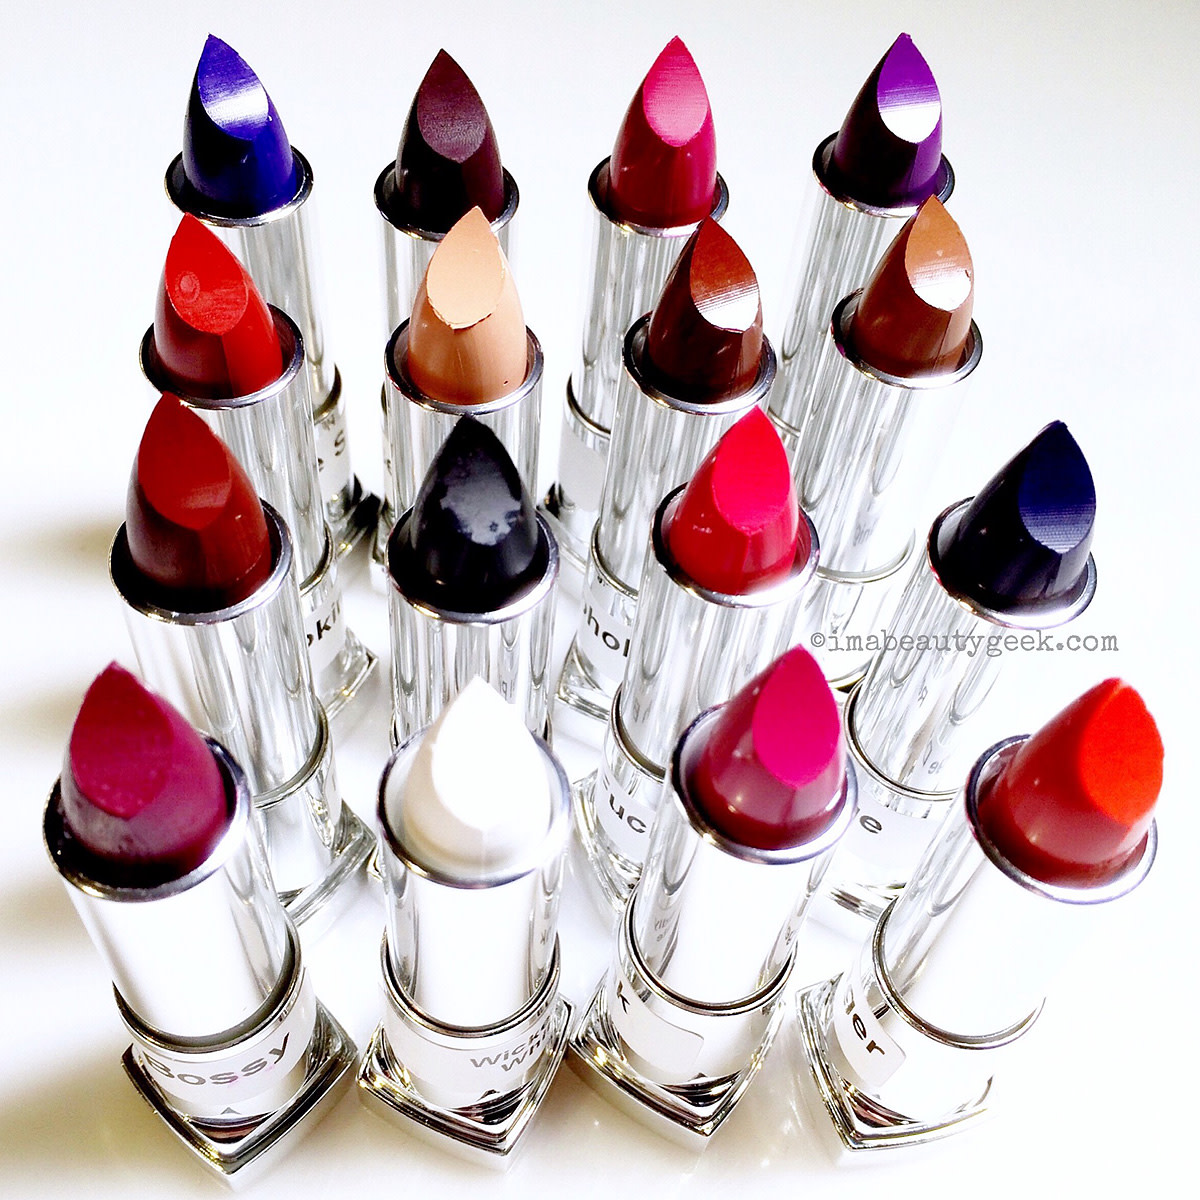 Maybelline New York ColorSensational The Loaded Bolds lipstick collection: Canada gets 16 shades.